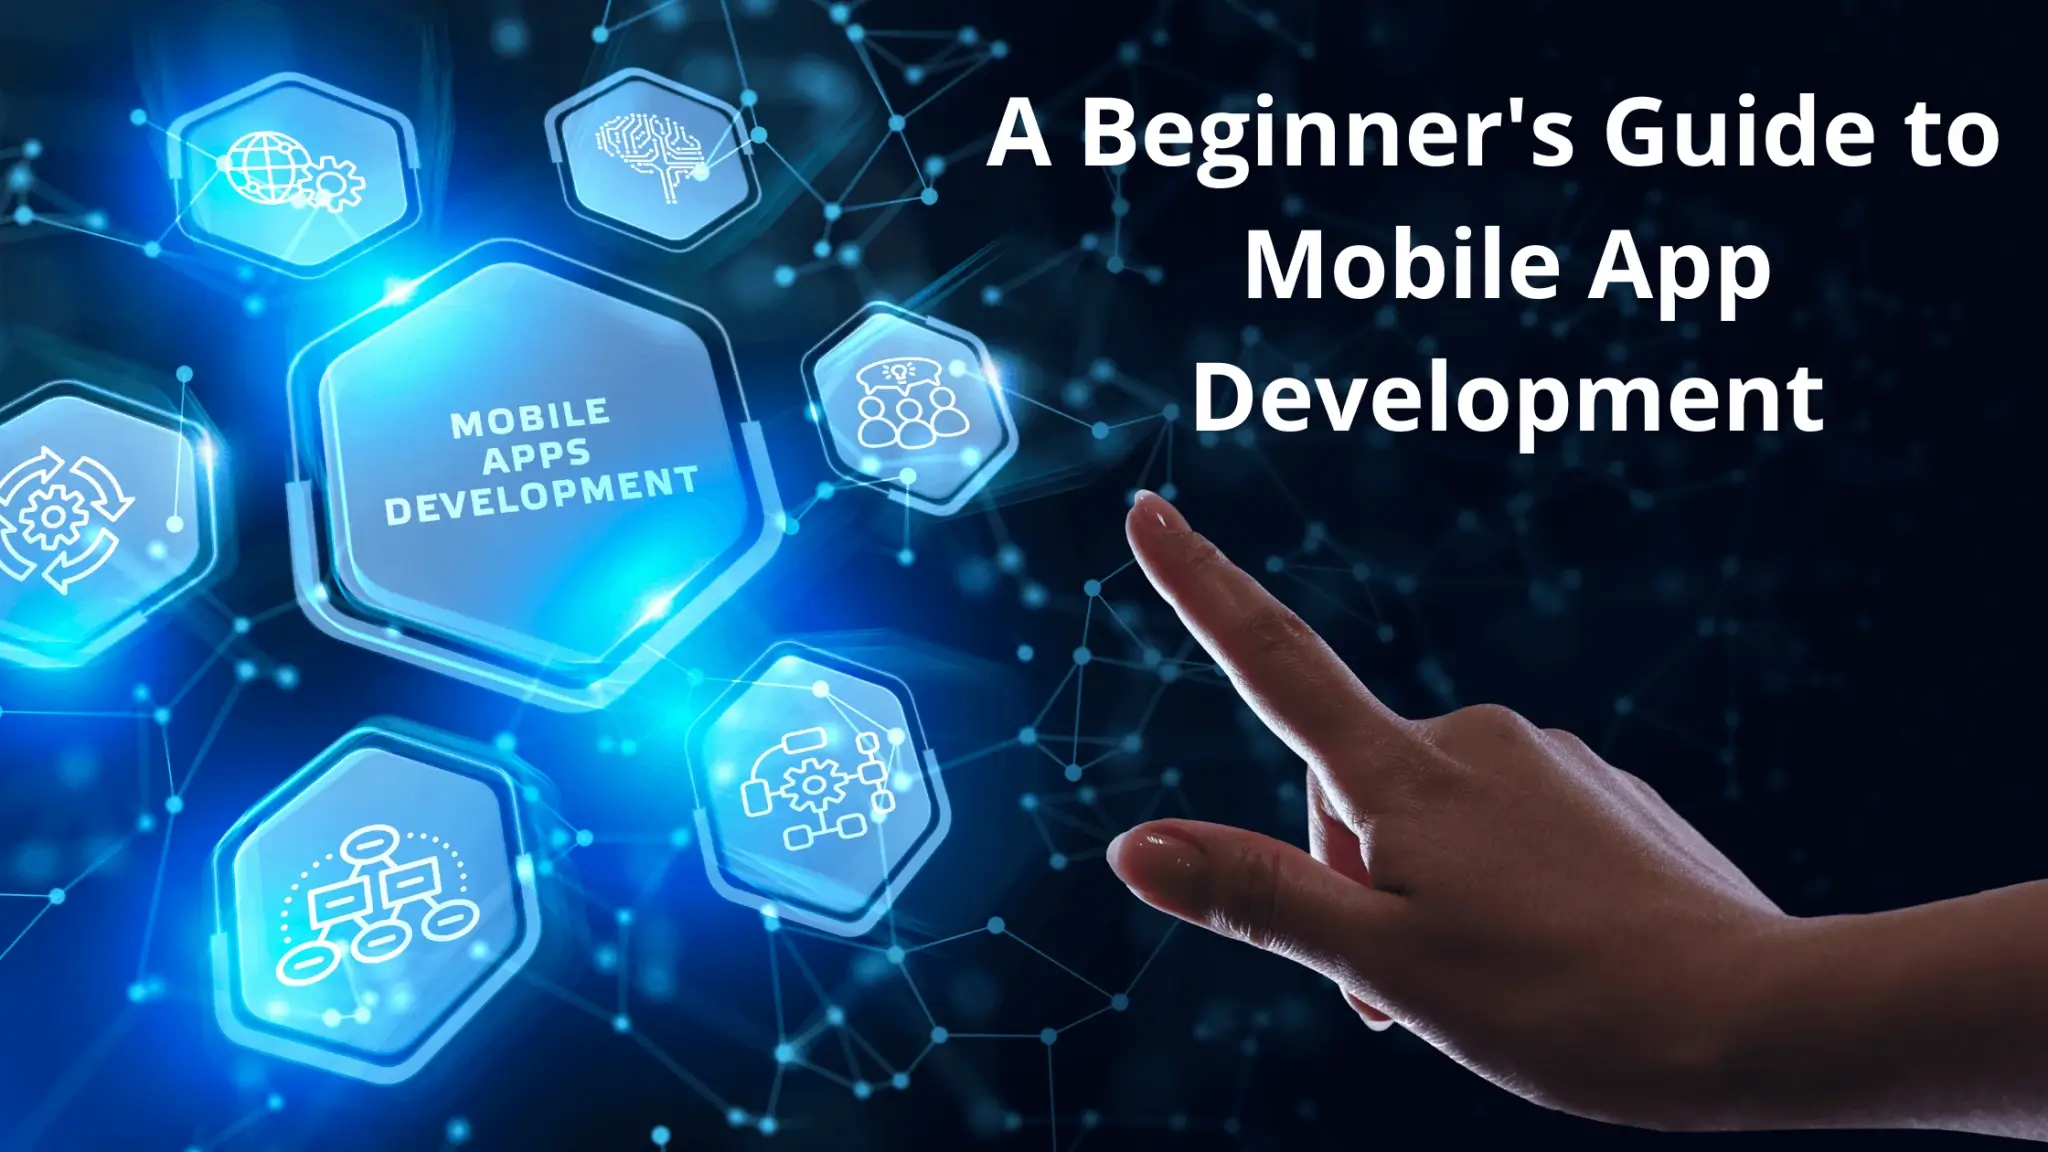 A-Beginners-Guide-to-Mobile-App-Development-1-2048x1152-1